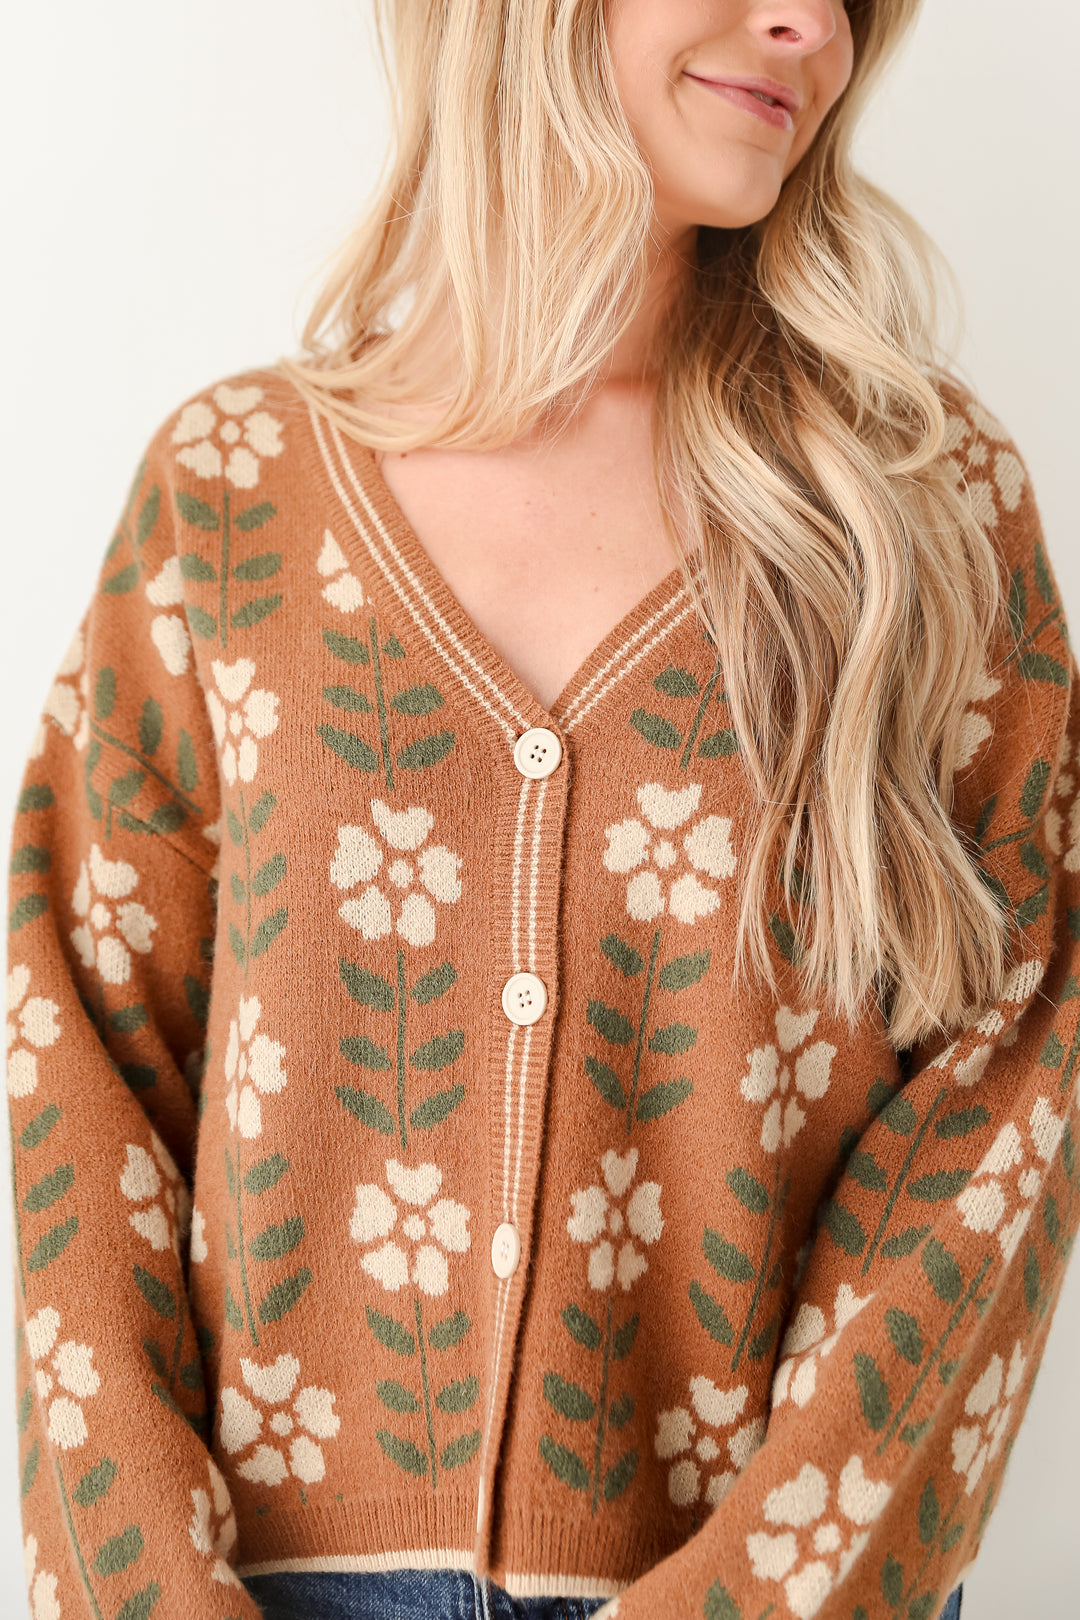 Promising Style Camel Oversized Floral Sweater Cardigan